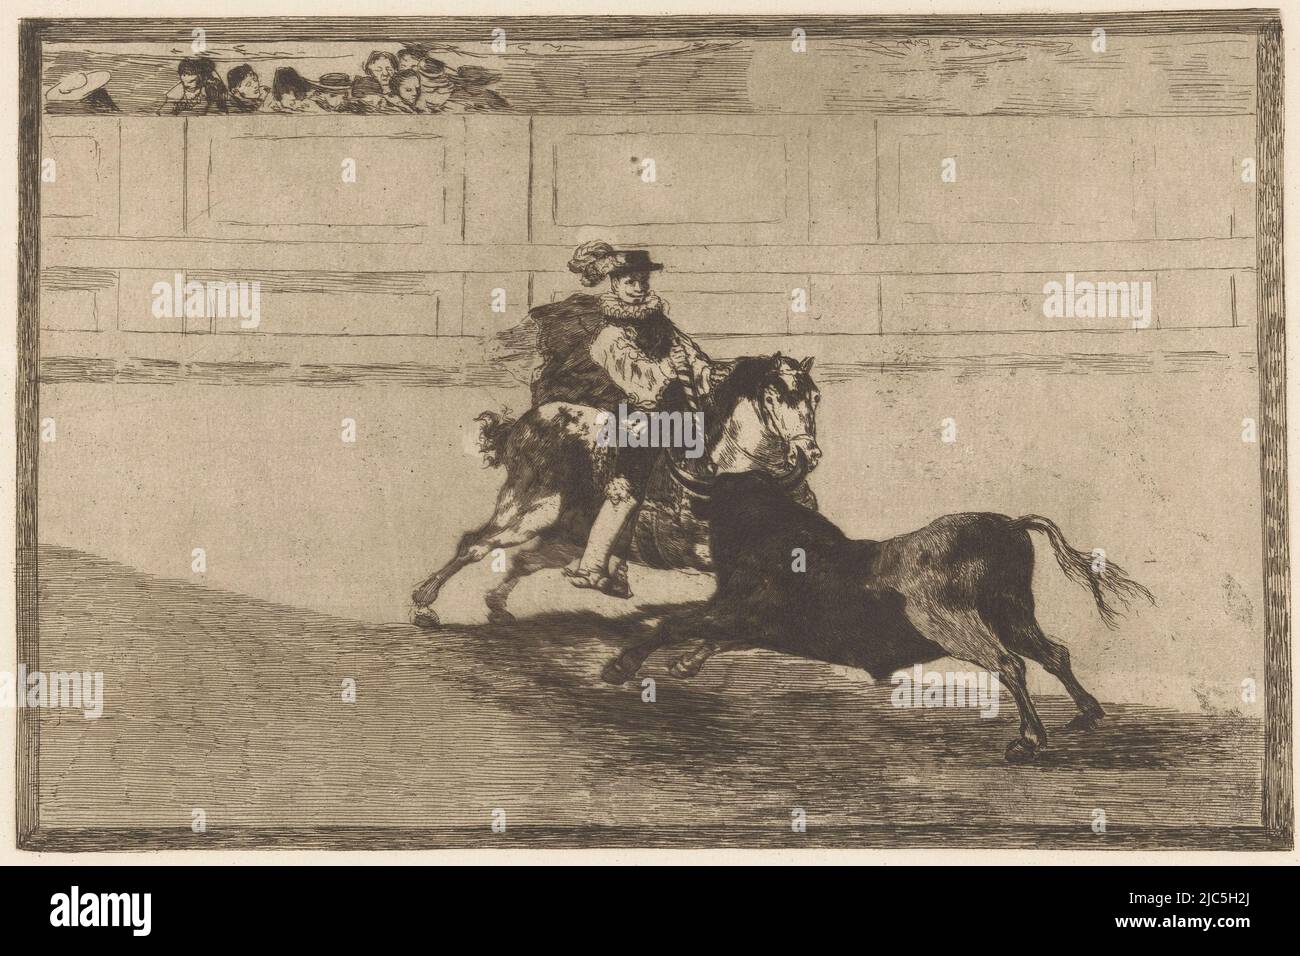 A Spanish man dressed as a nobleman, on horseback and fighting a bull in an arena. On the stand a small group of spectators. Numbered upper right: 13., Bullfighter in an arena Un caballero Español en plaza quebrando rejoncillos sin auxilio de los chulos Bullfighting (series title) La Taureaumachie (series title) La Tauromaquia (series title), print maker: Francisco de Goya, publisher: Eugène Loizelet, print maker: Spain, publisher: Paris, 1876, paper, etching, h 247 mm × w 355 mm Stock Photo